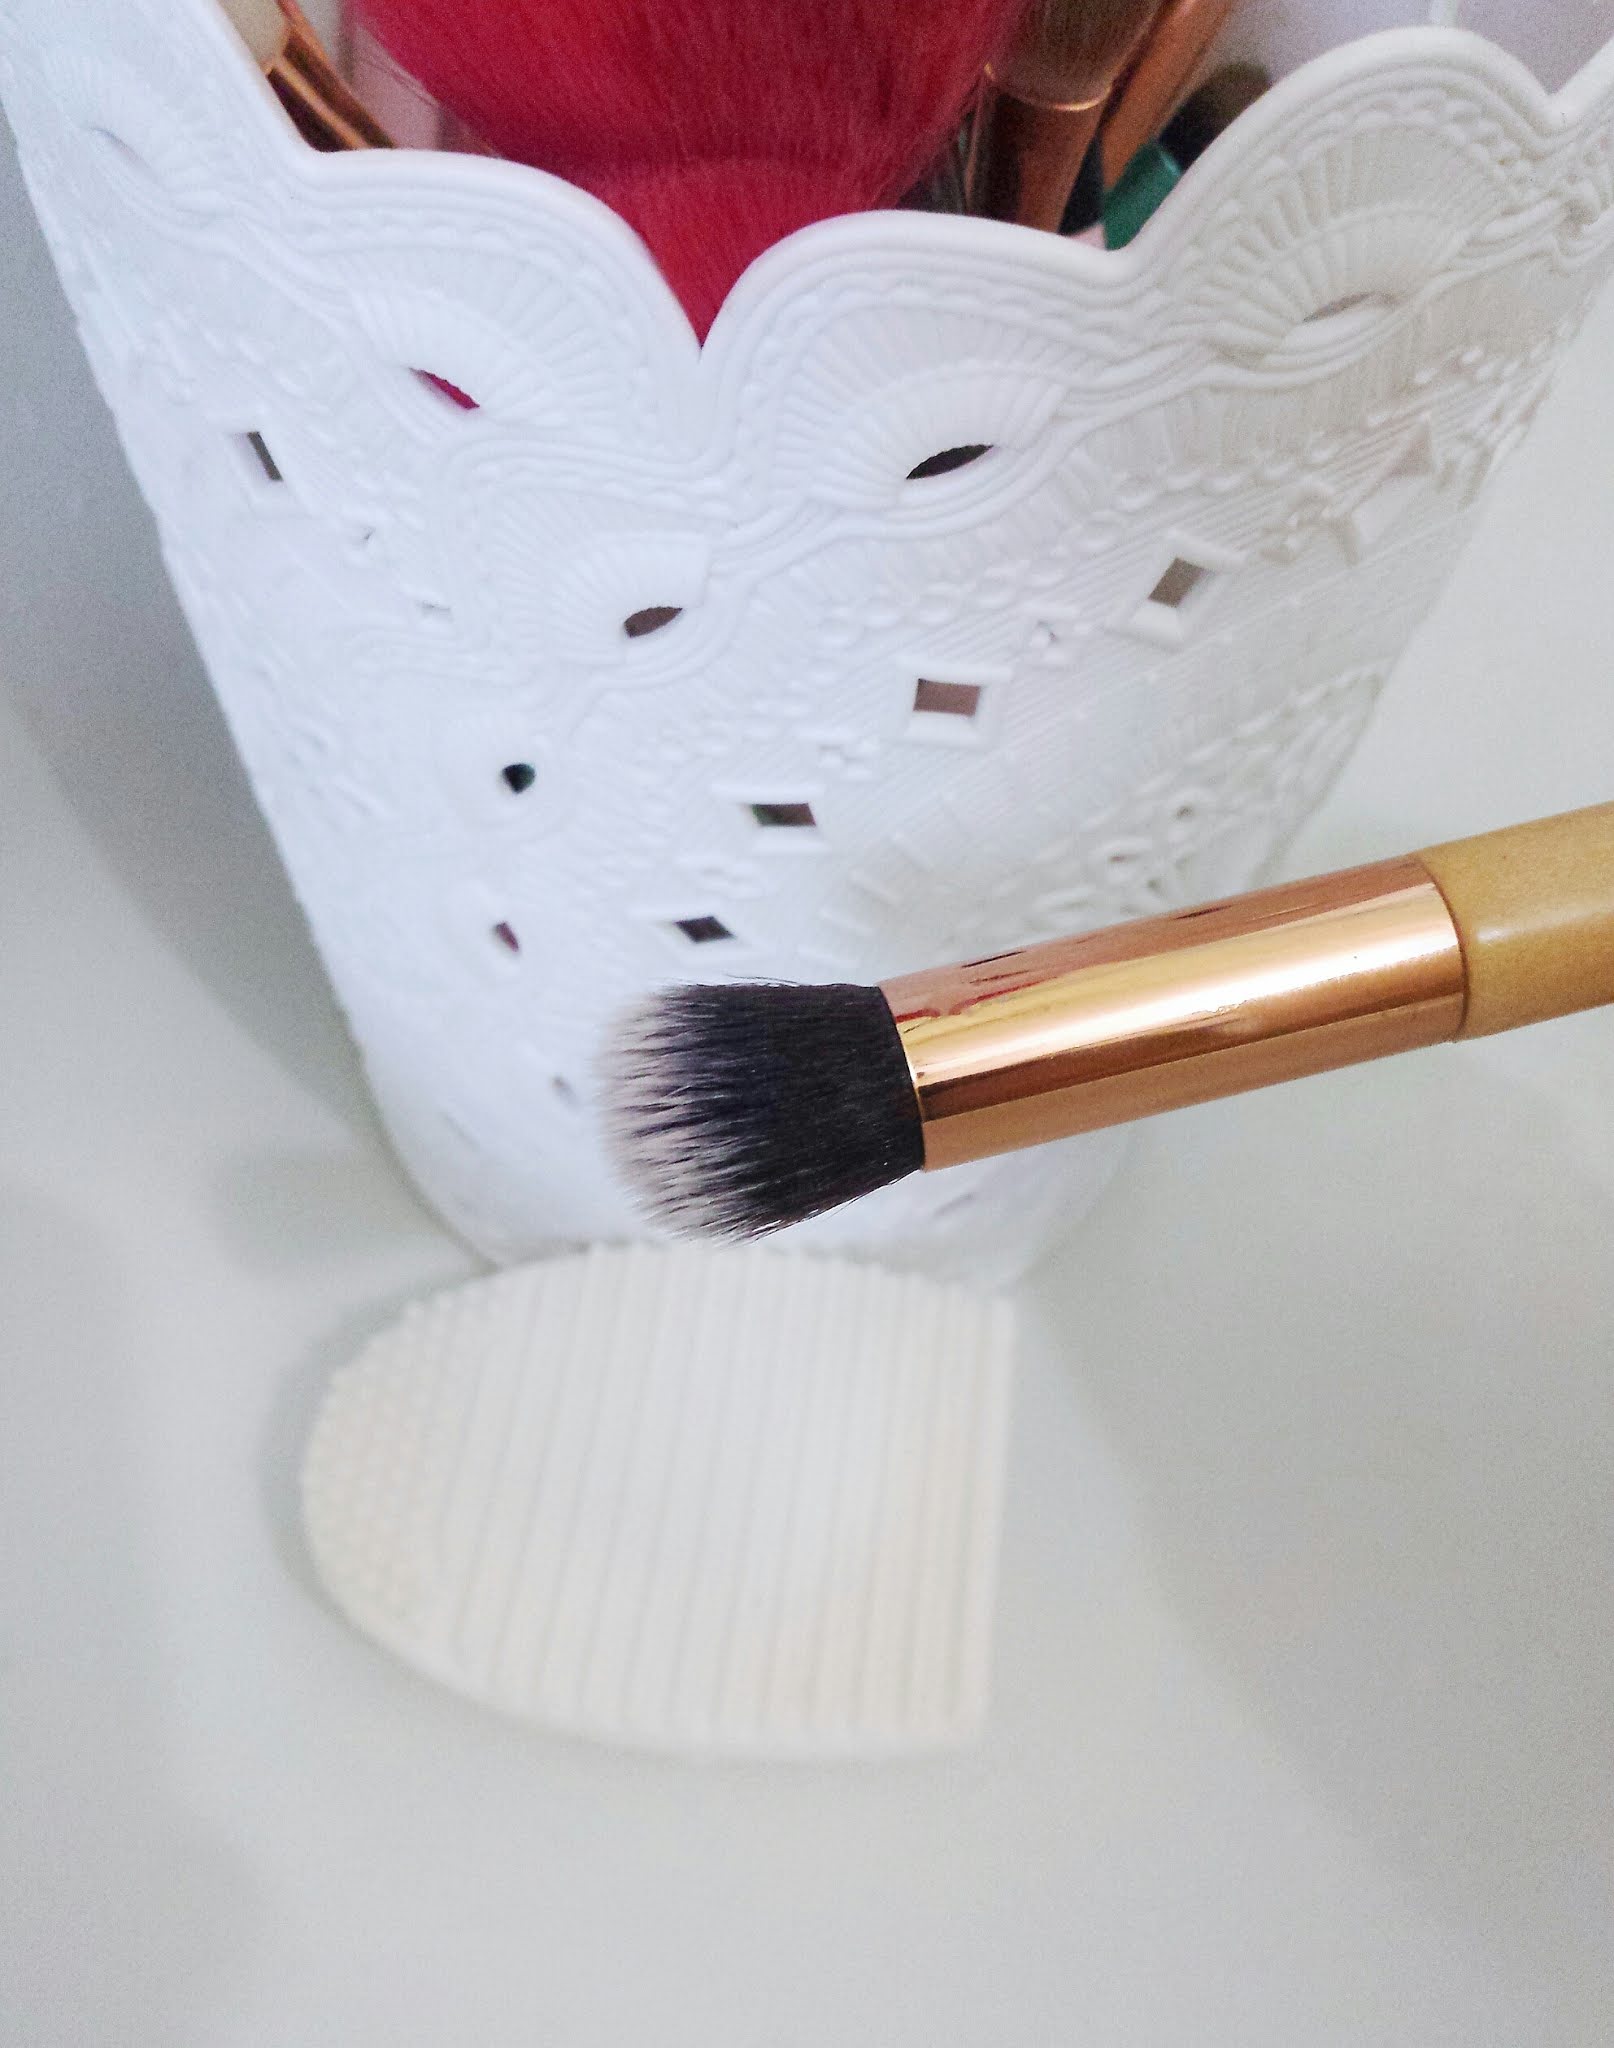 How I Clean My Makeup Brushes | Only 5 Simple Steps!